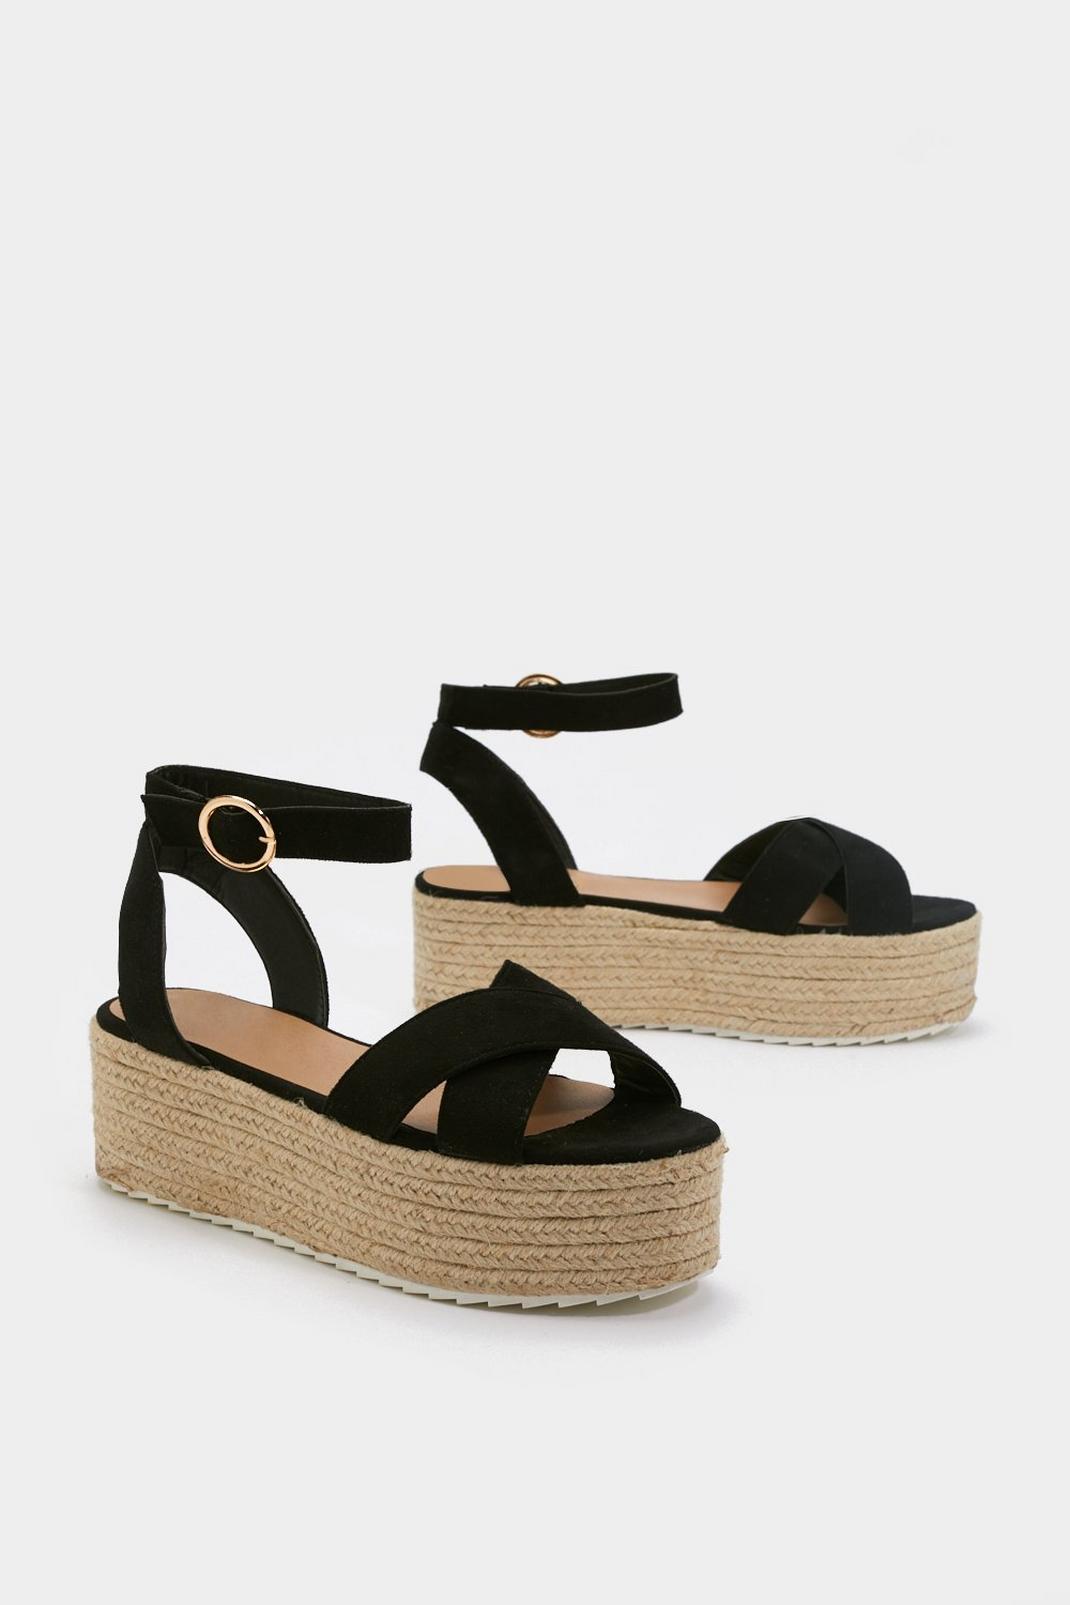 Weave Been There Faux Suede Platform Sandals image number 1